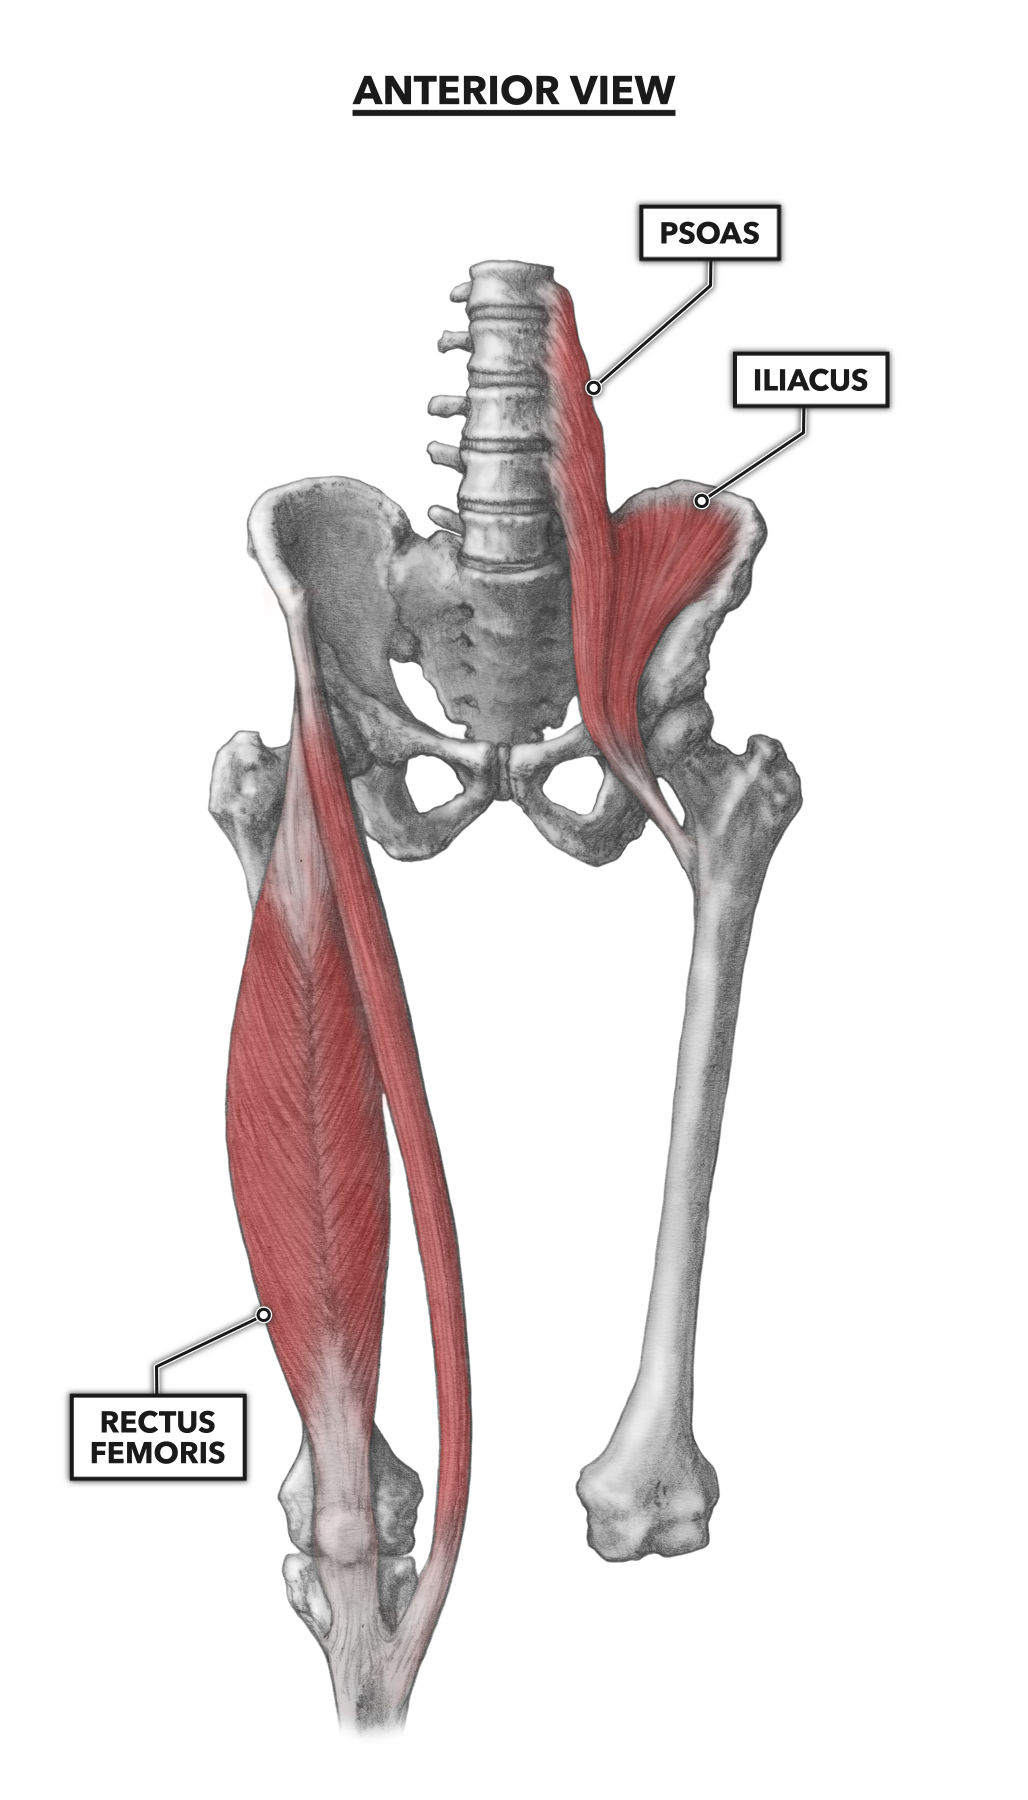 Diagram Of Hip And Back Muscles Anatomy Of The Hip Ac